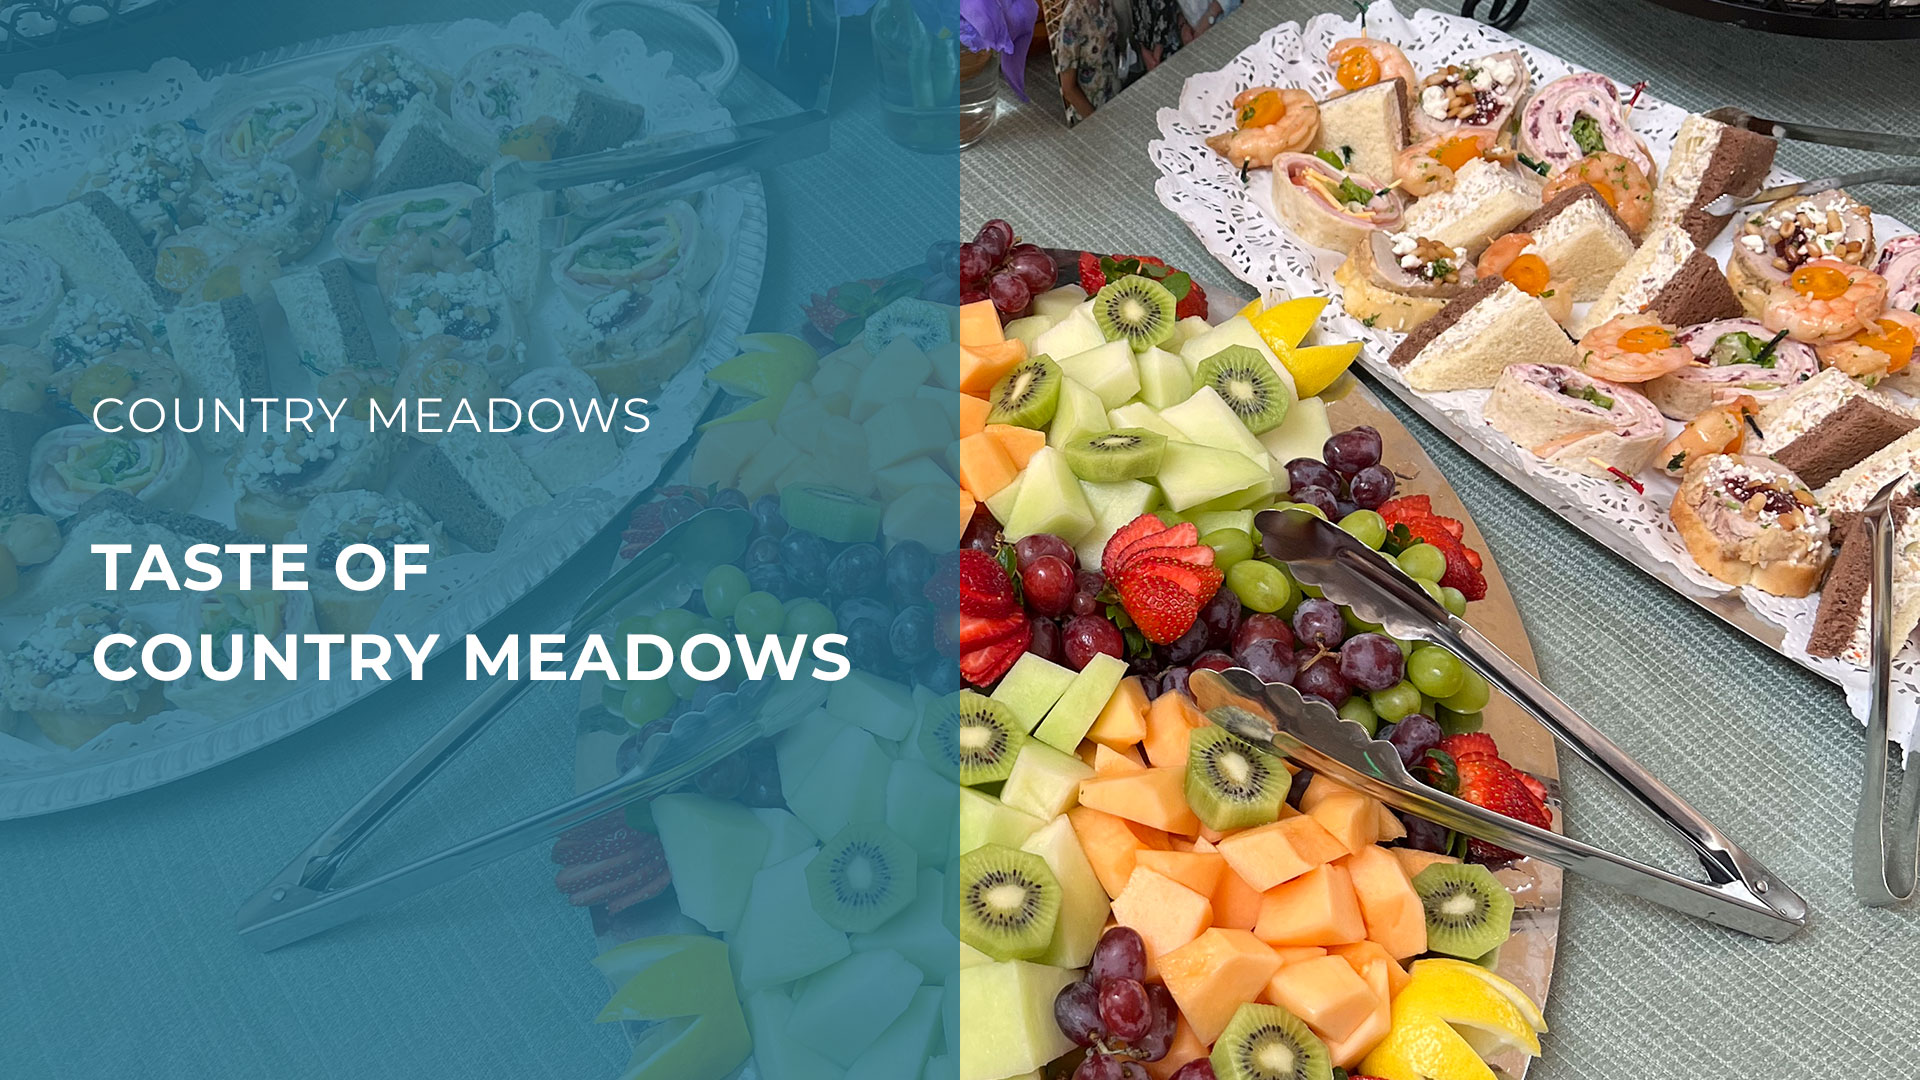 Taste of Country Meadows event